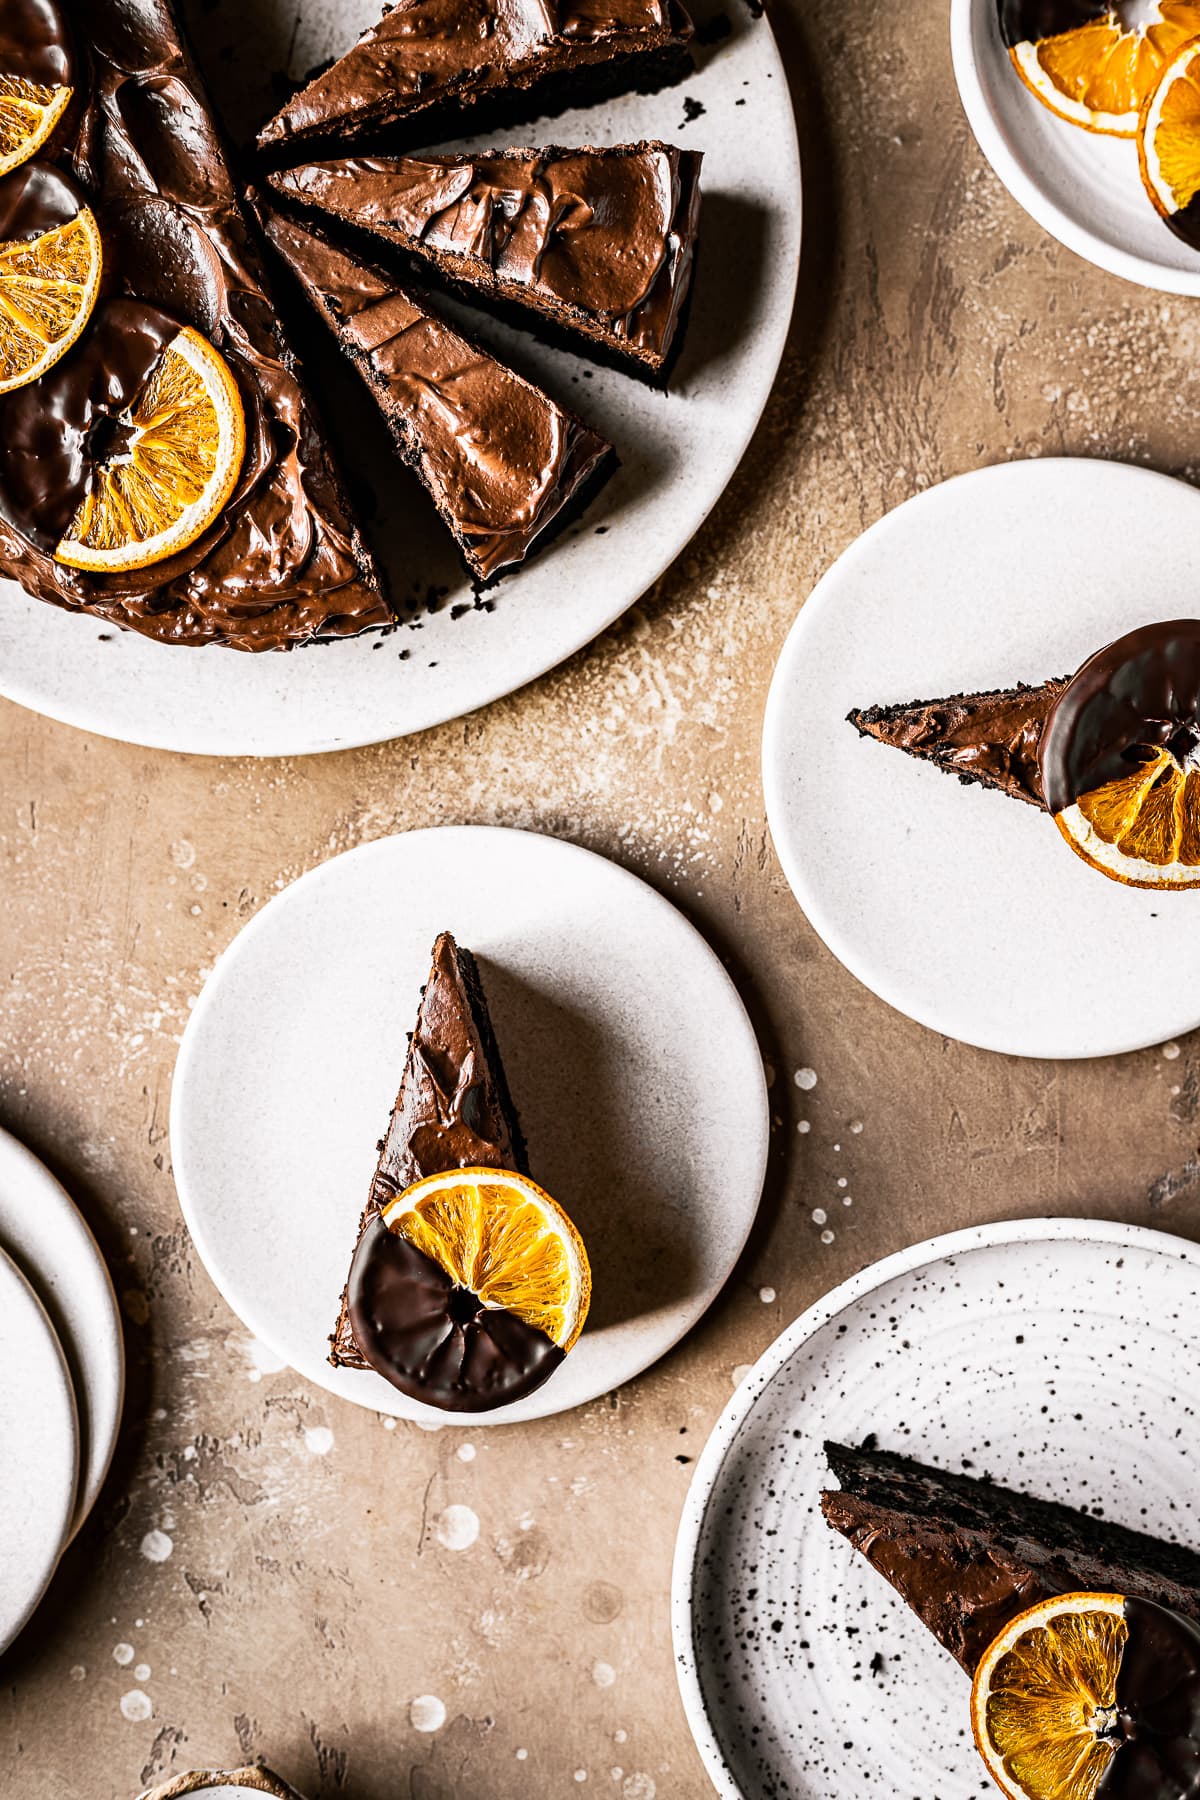 Slices of chocolate orange cake on plates with a large serving platter of additional cake nearby.